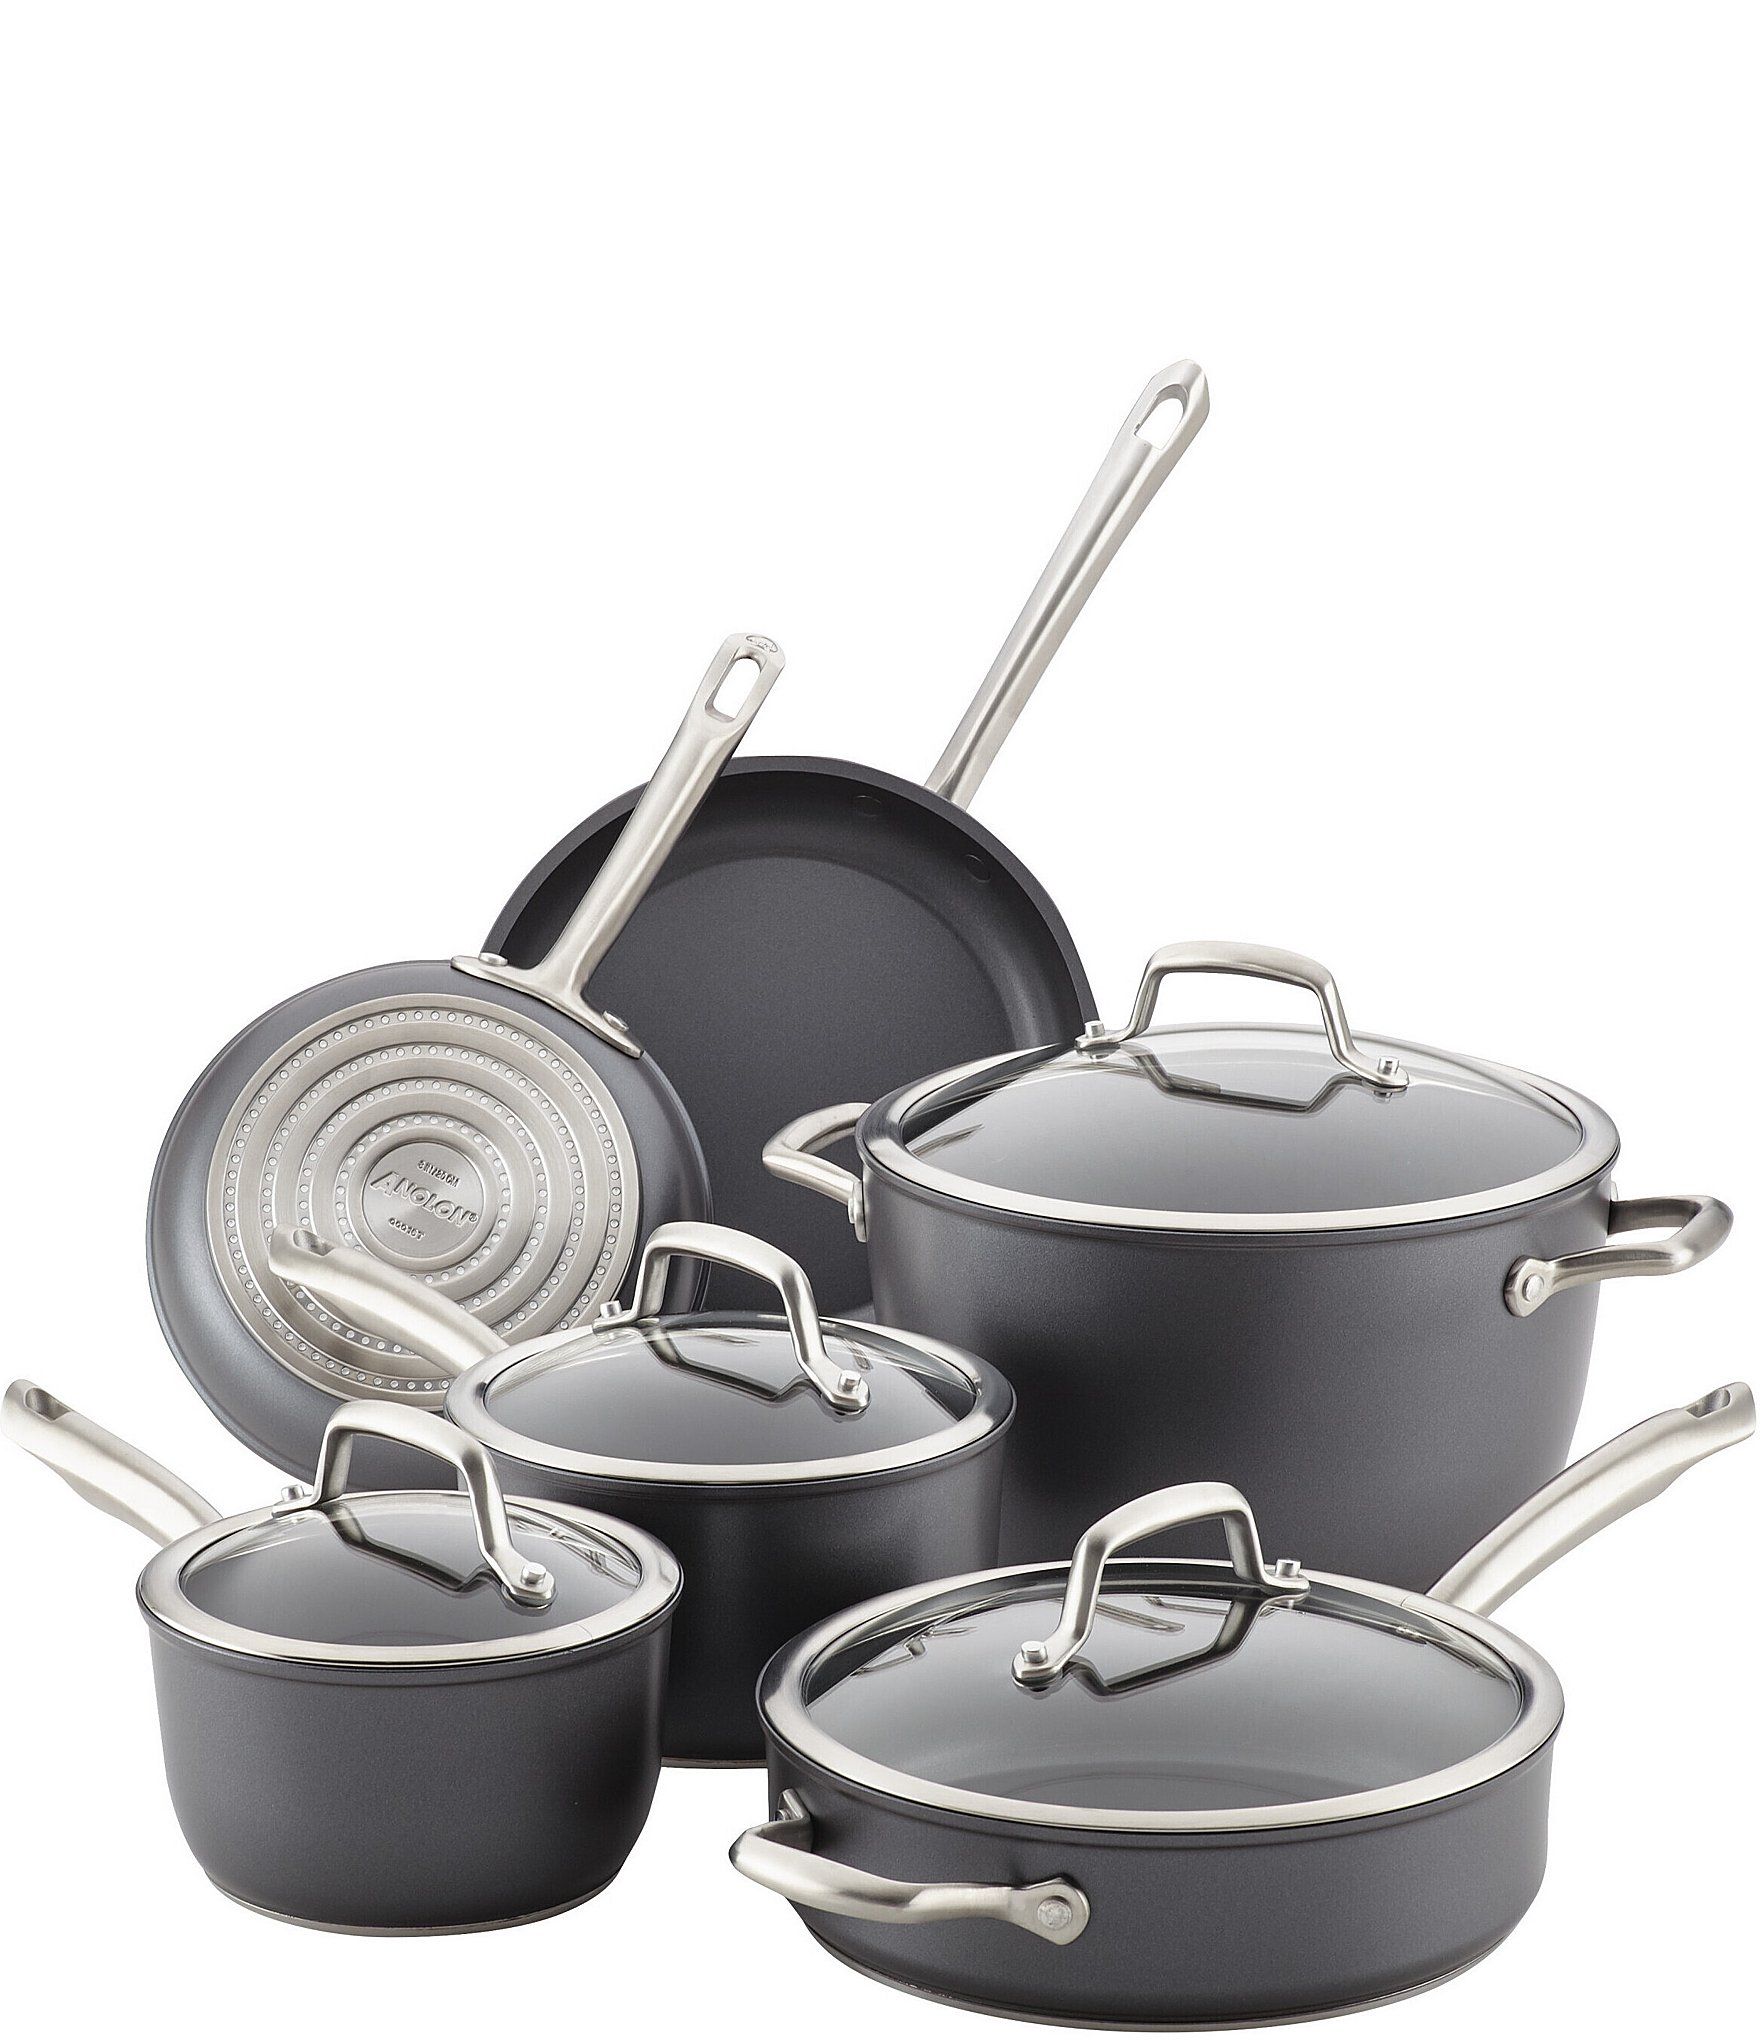 https://dimg.dillards.com/is/image/DillardsZoom/zoom/anolon-accolade-forged-hard-anodized-precision-forge-10-piece-cookware-set/05504023_zi.jpg